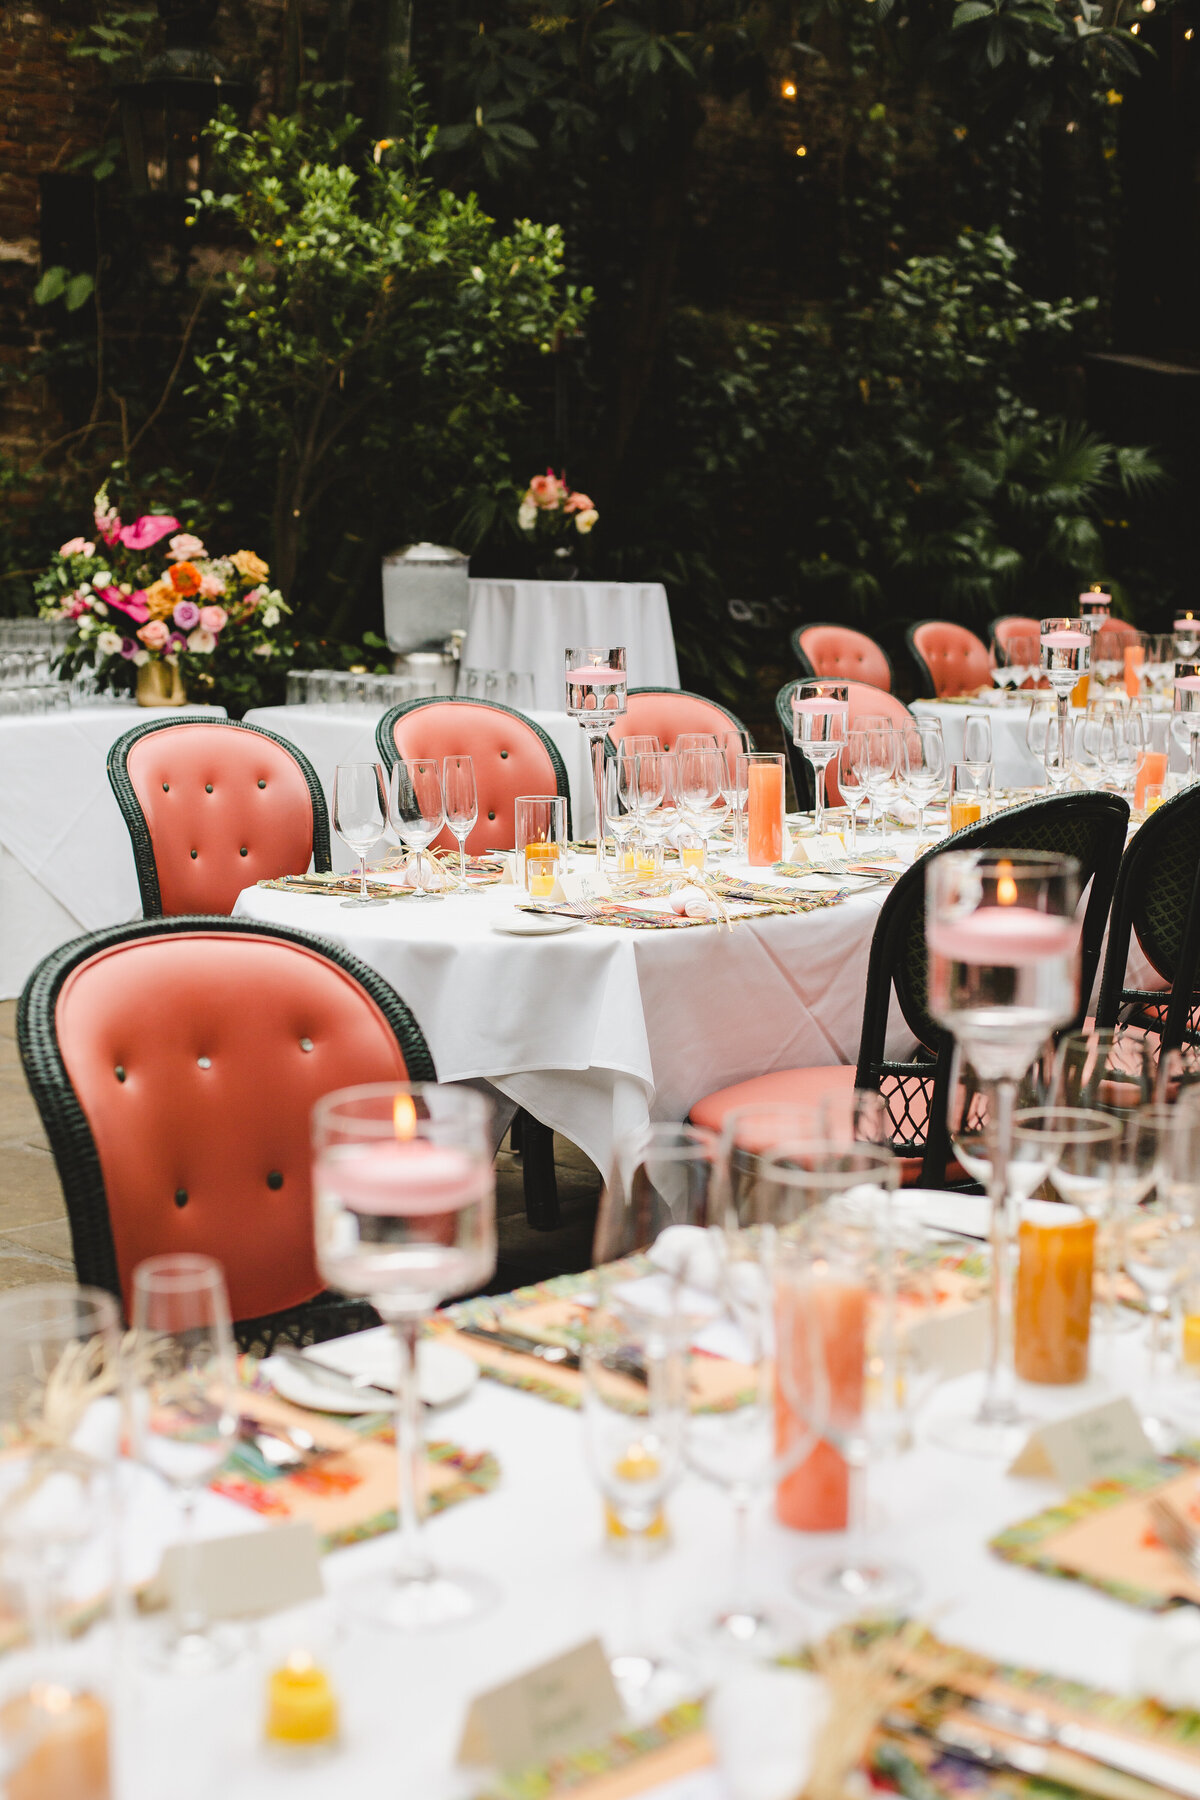 Sarah + George - Rehearsal Dinner Welcome Party at Brennen's New Orleans - Luxury Event Planner - Michelle Norwood Events10